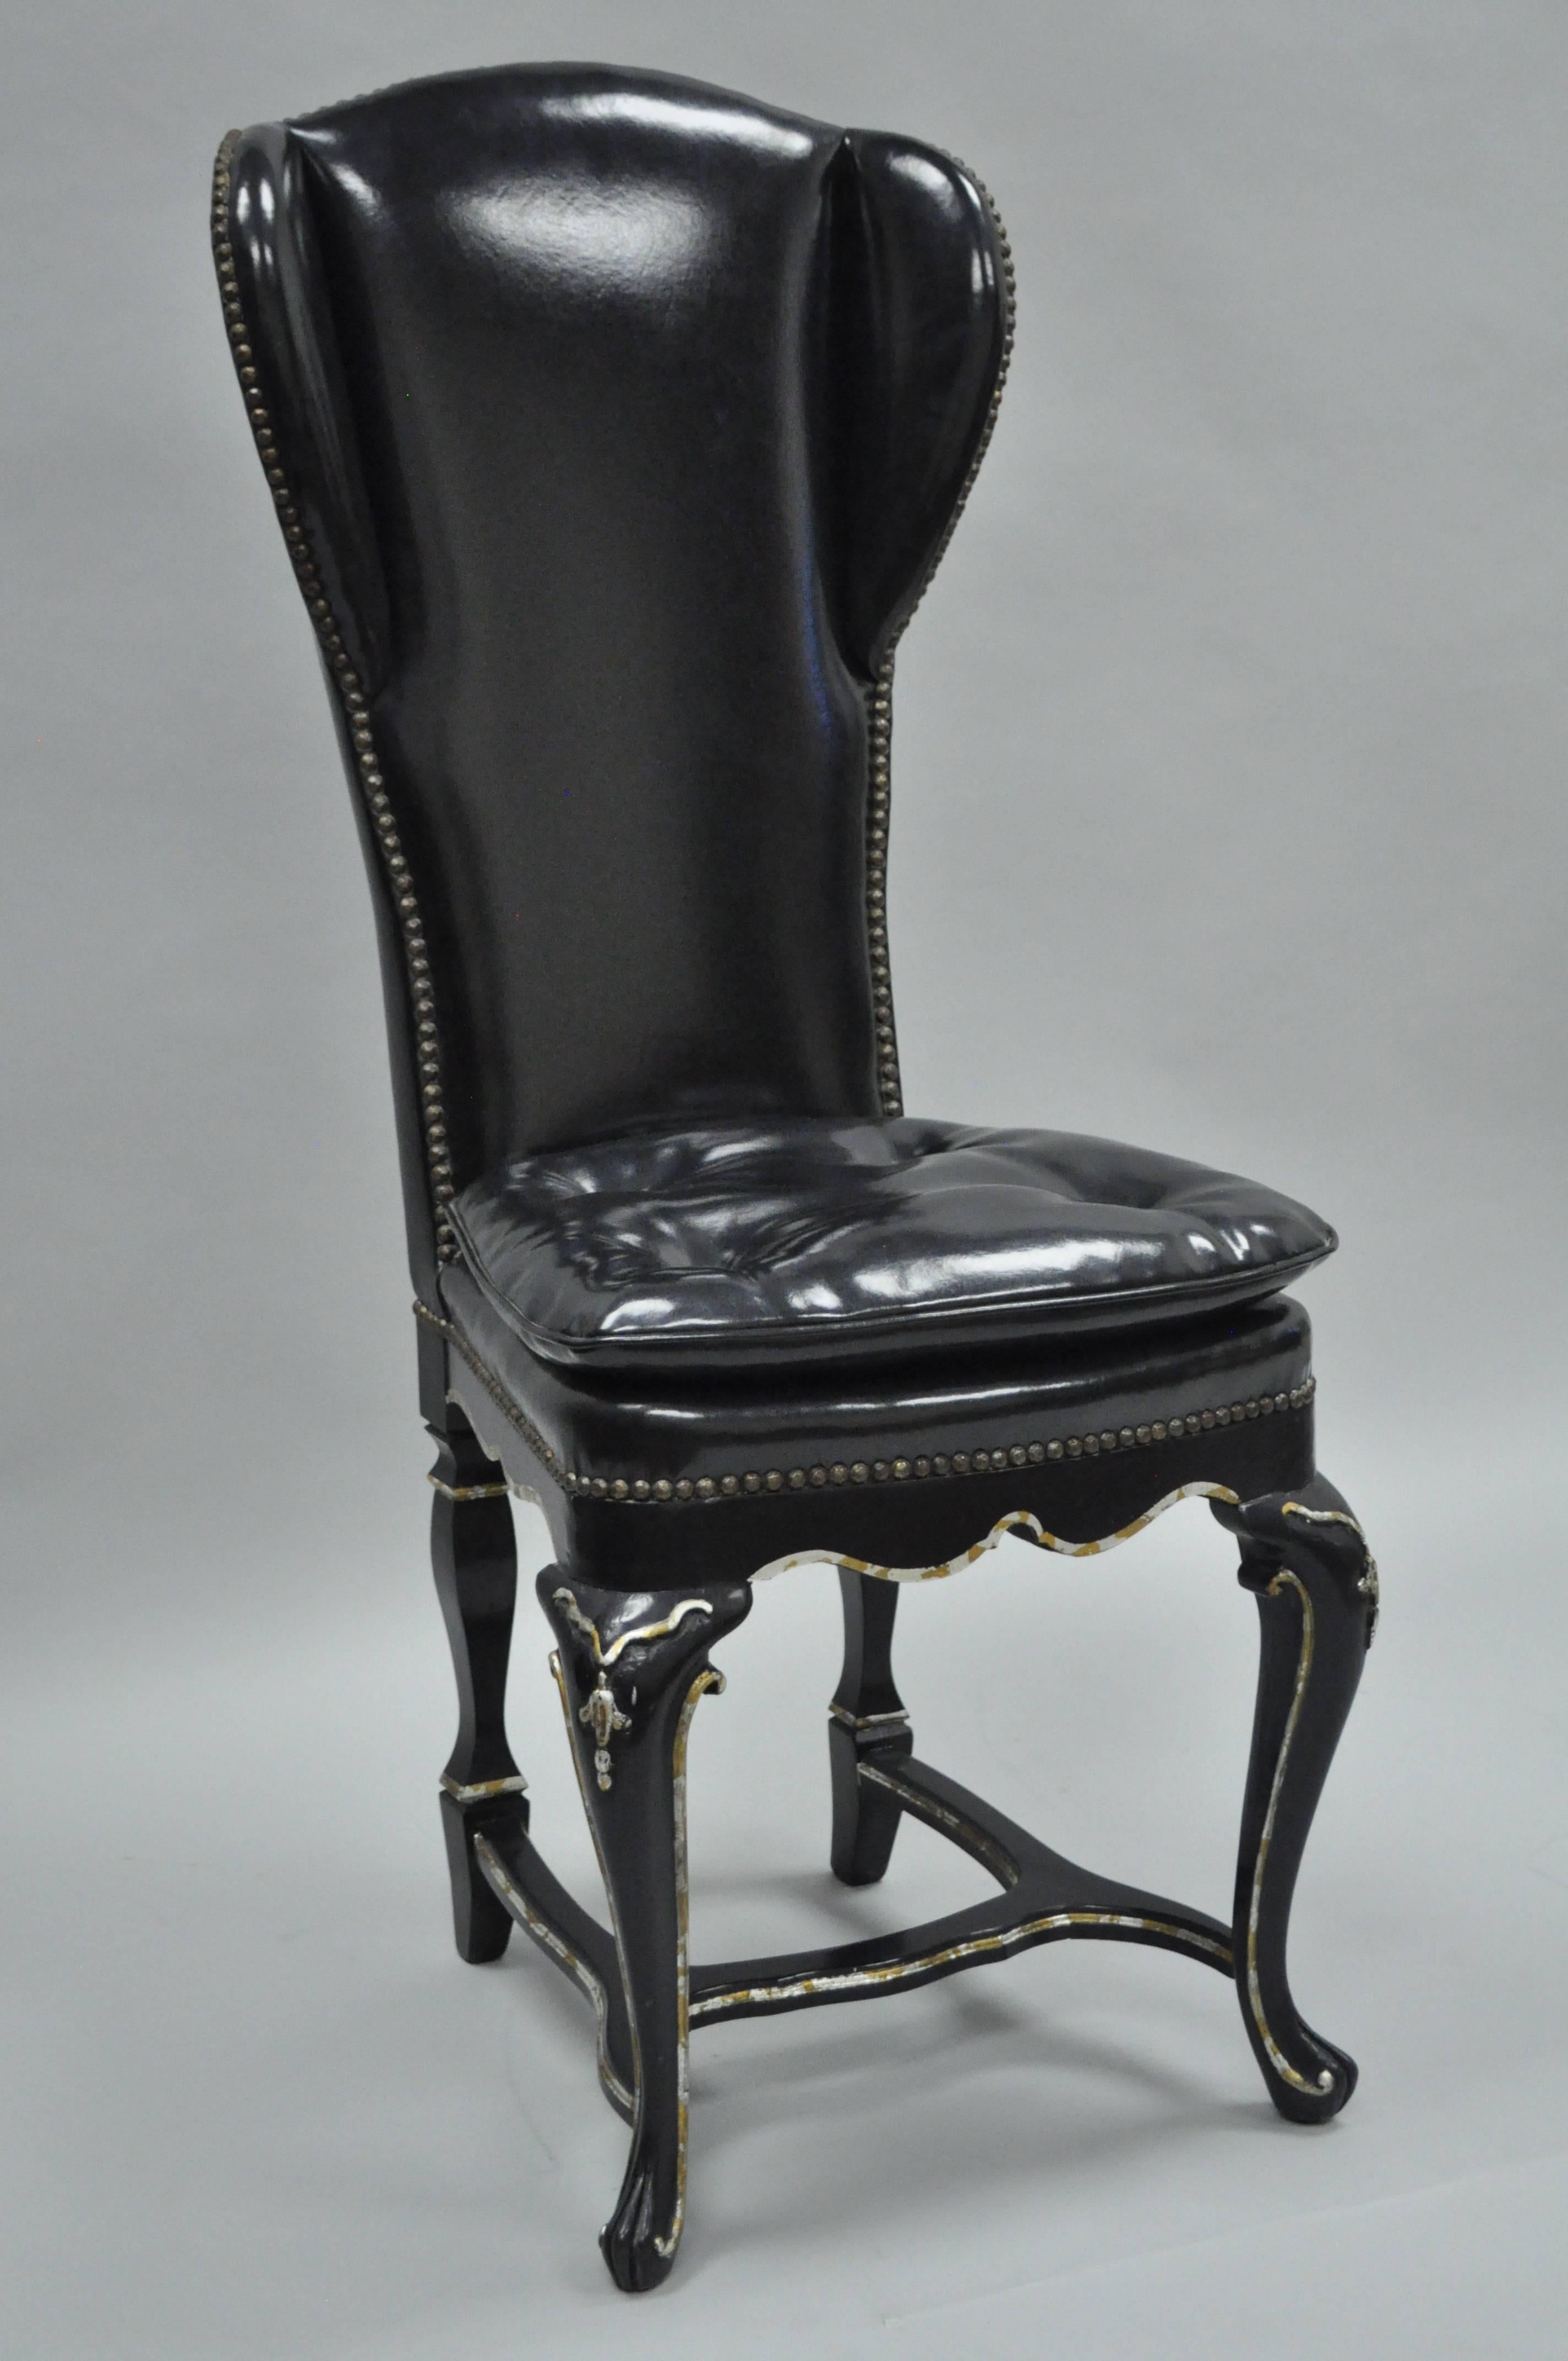 Very unique ebonized side chair in the Swedish Rococo style. Item features a shapely solid wood wing back frame, stretcher supported base, all finished in a gloss black lacquer with hand-painted faux mother-of-pearl trim. Chair is further accented